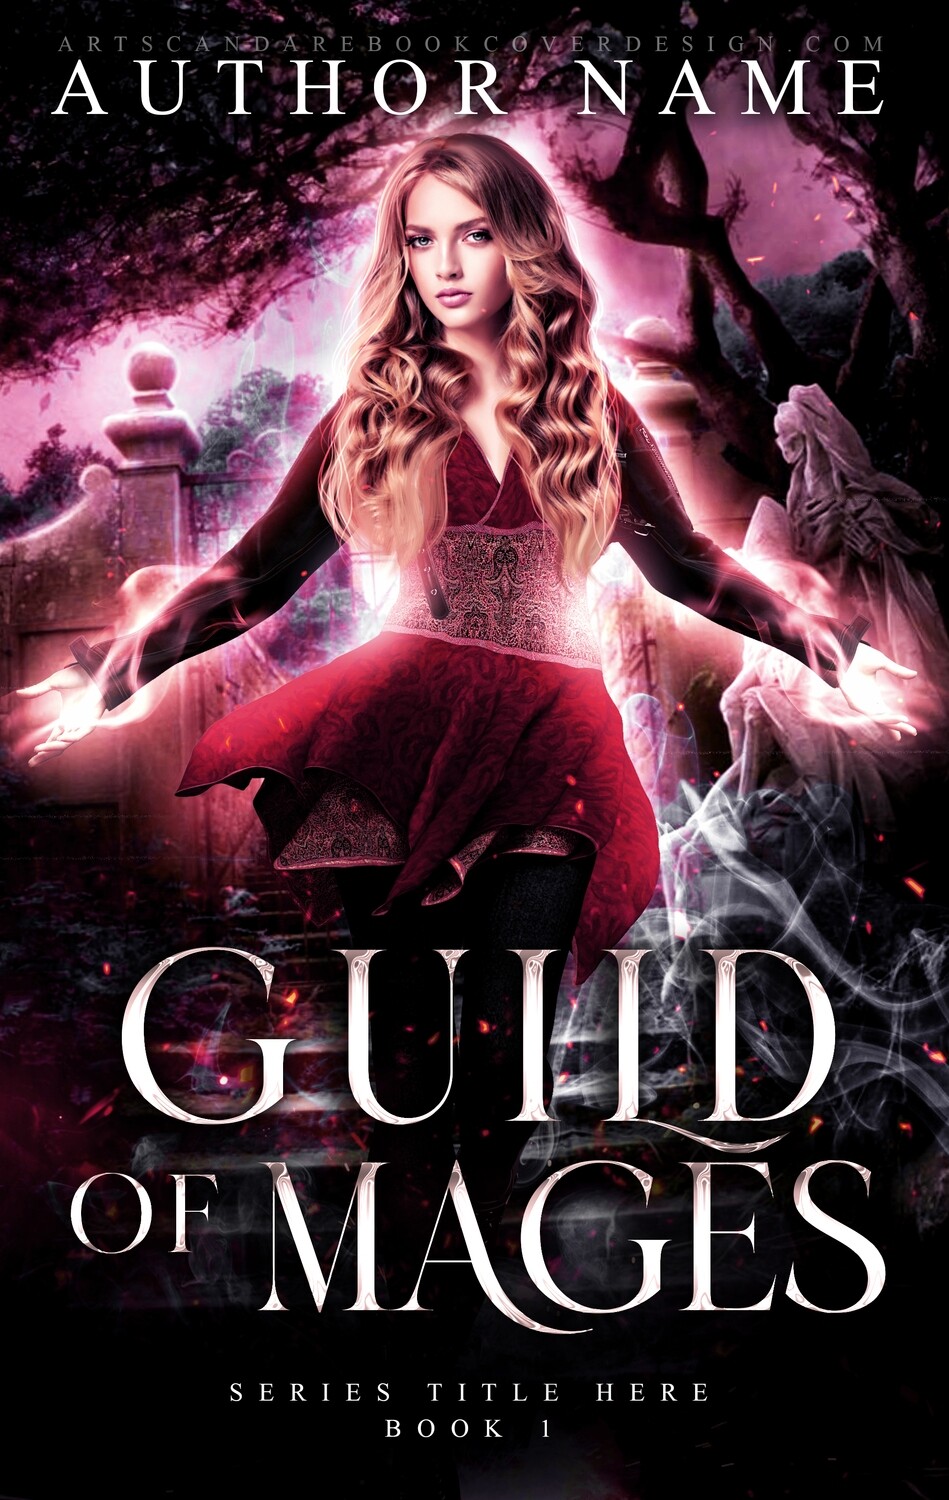 GUILD OF MAGES